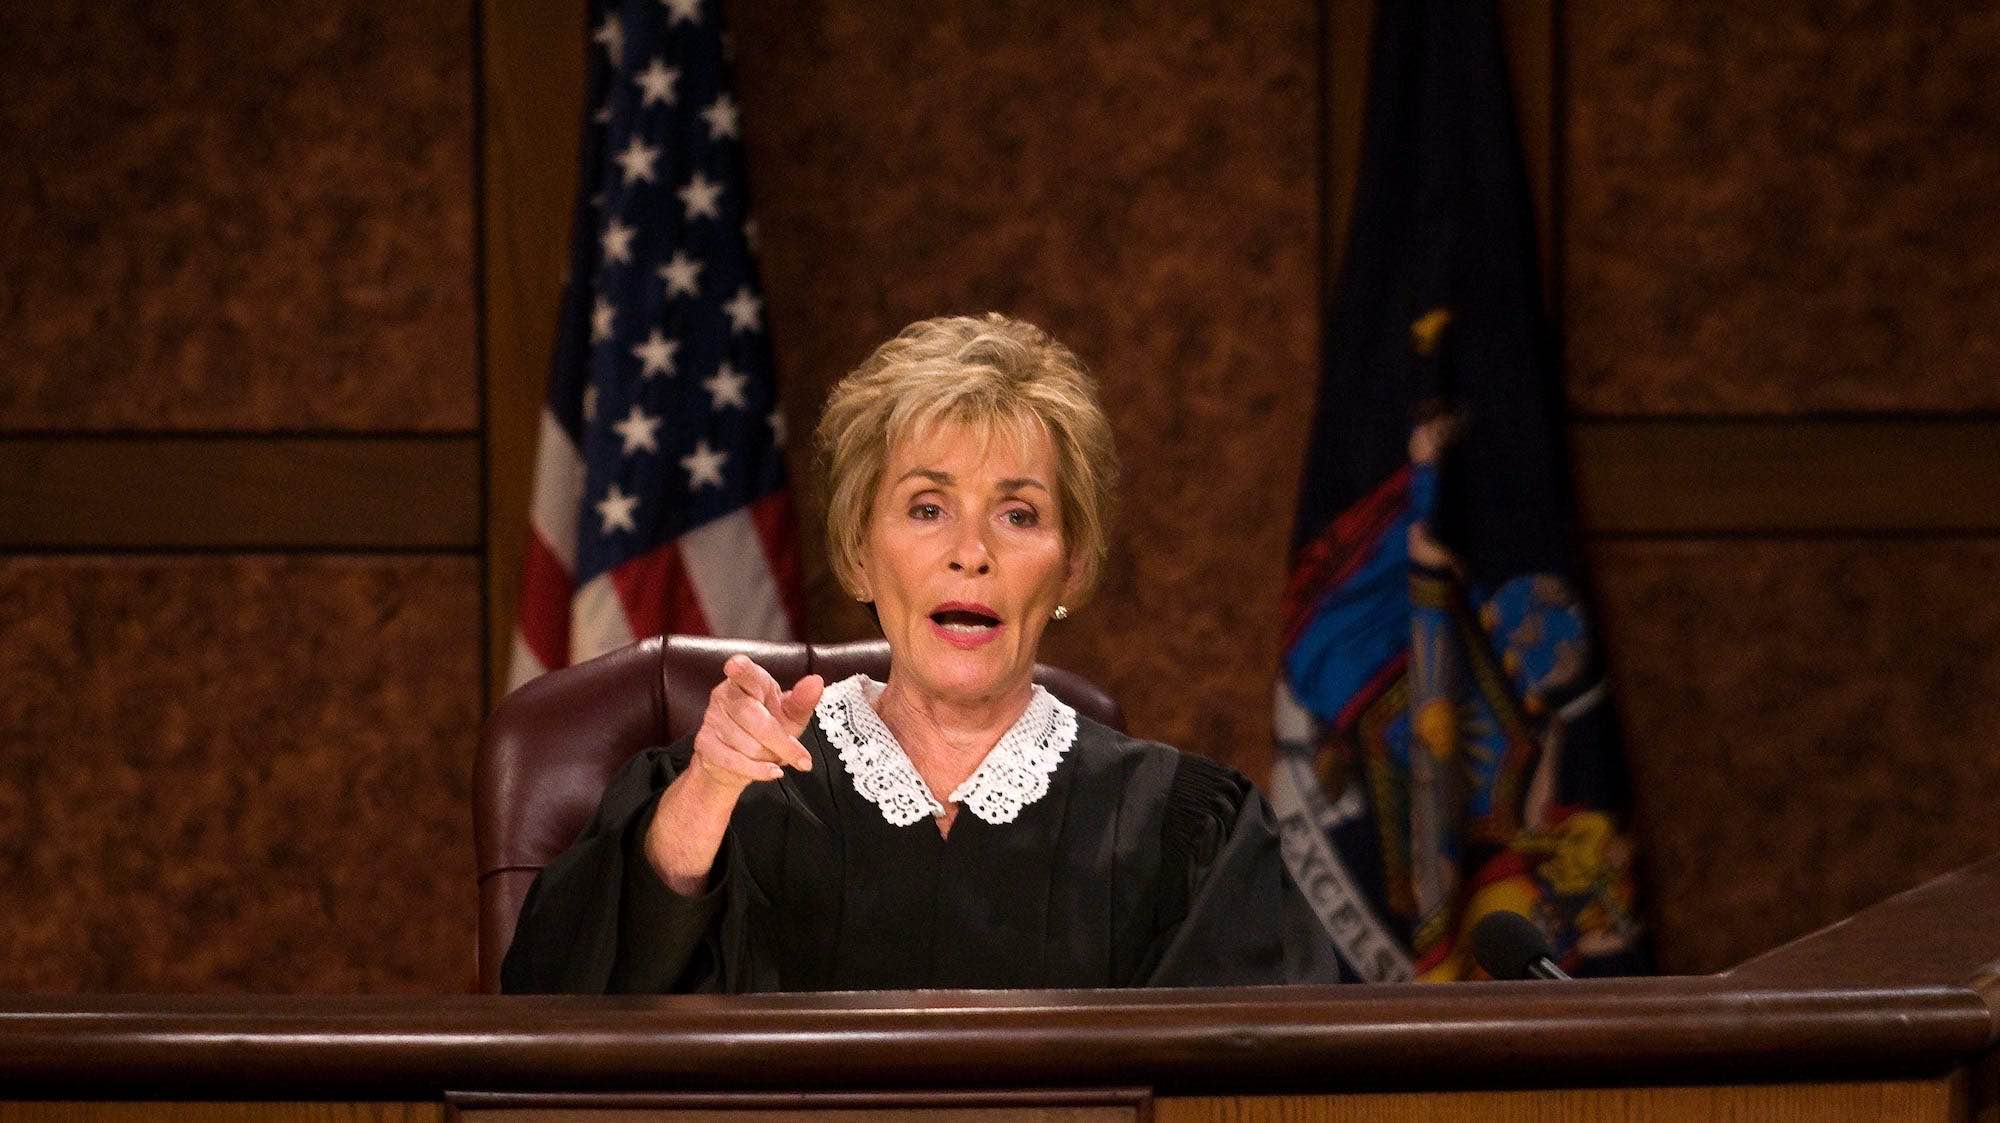 Celebrate Judge Judy's return to TV with these infamous episodes Film